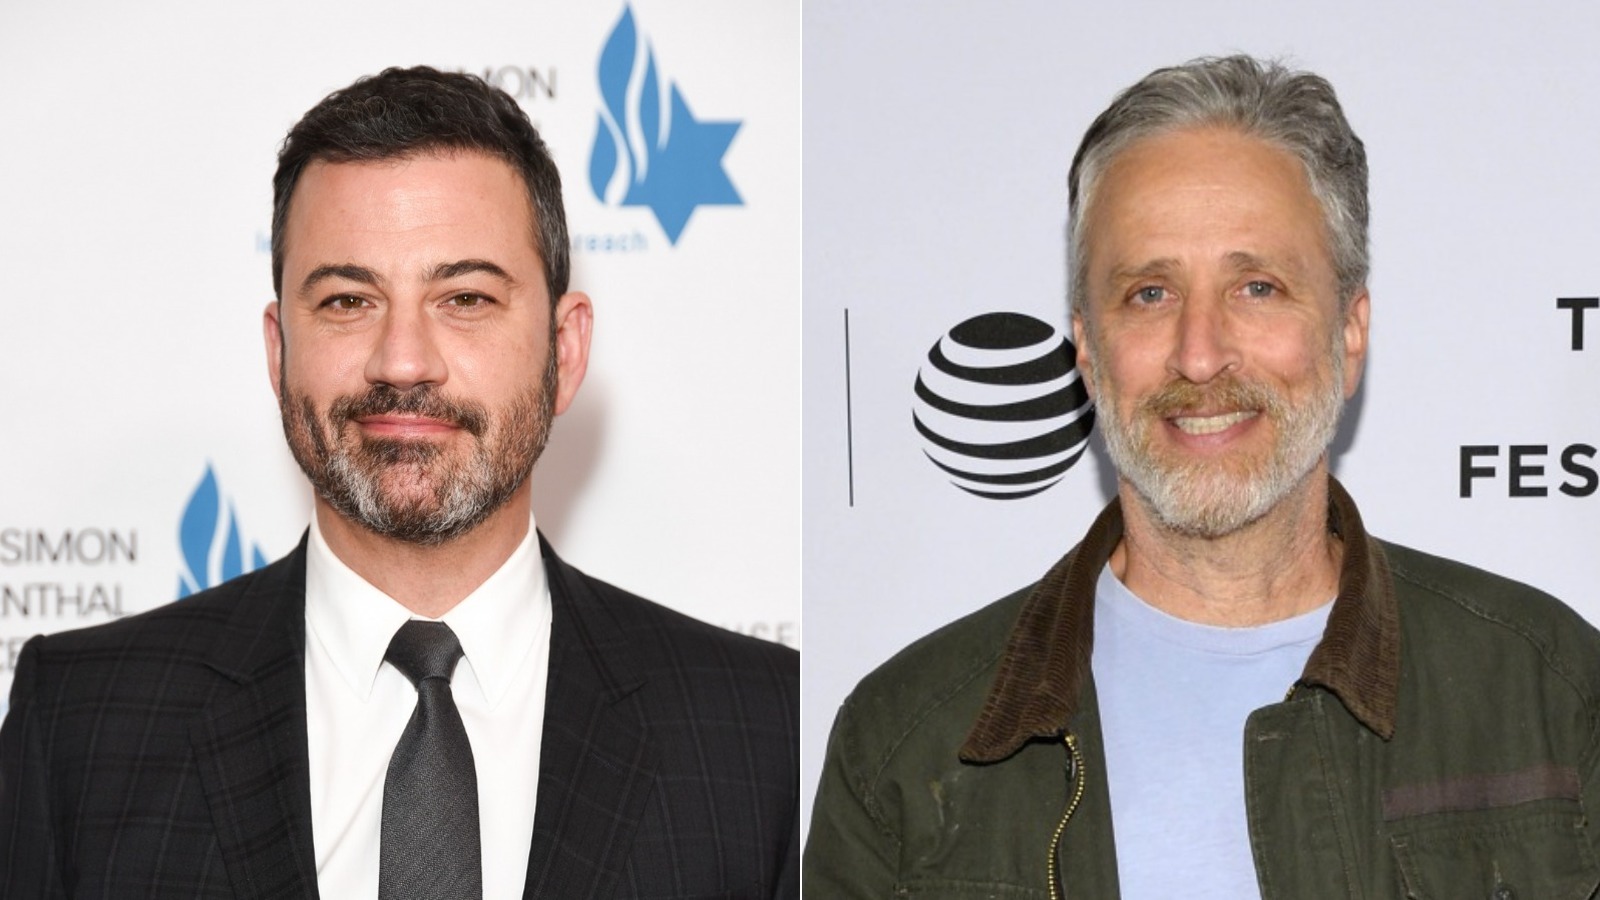 Why Jimmy Kimmel's Comments About Jon Stewart Are Raising Eyebrows